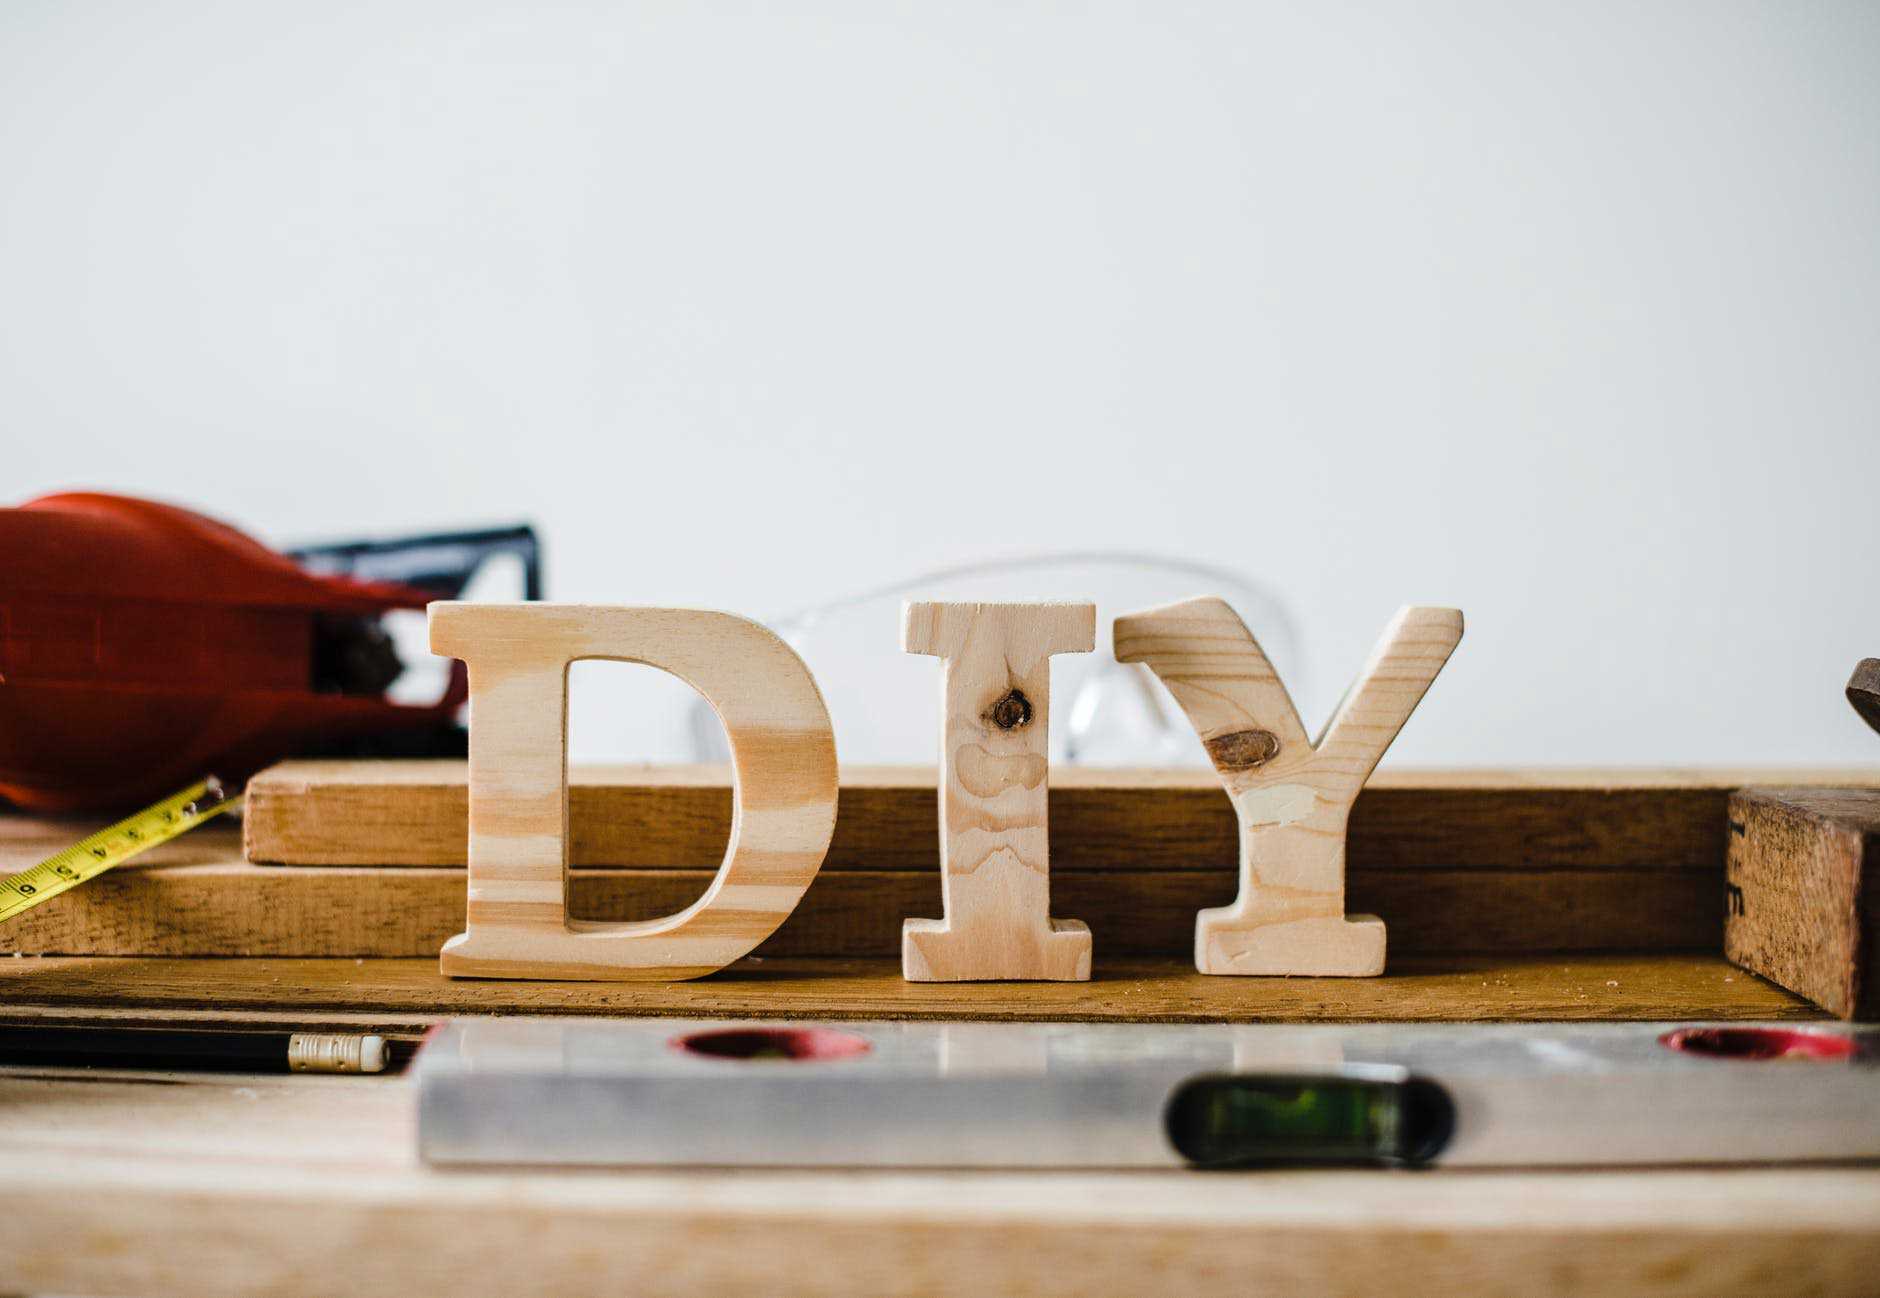 DIY in Wooden Letters on Work Bench